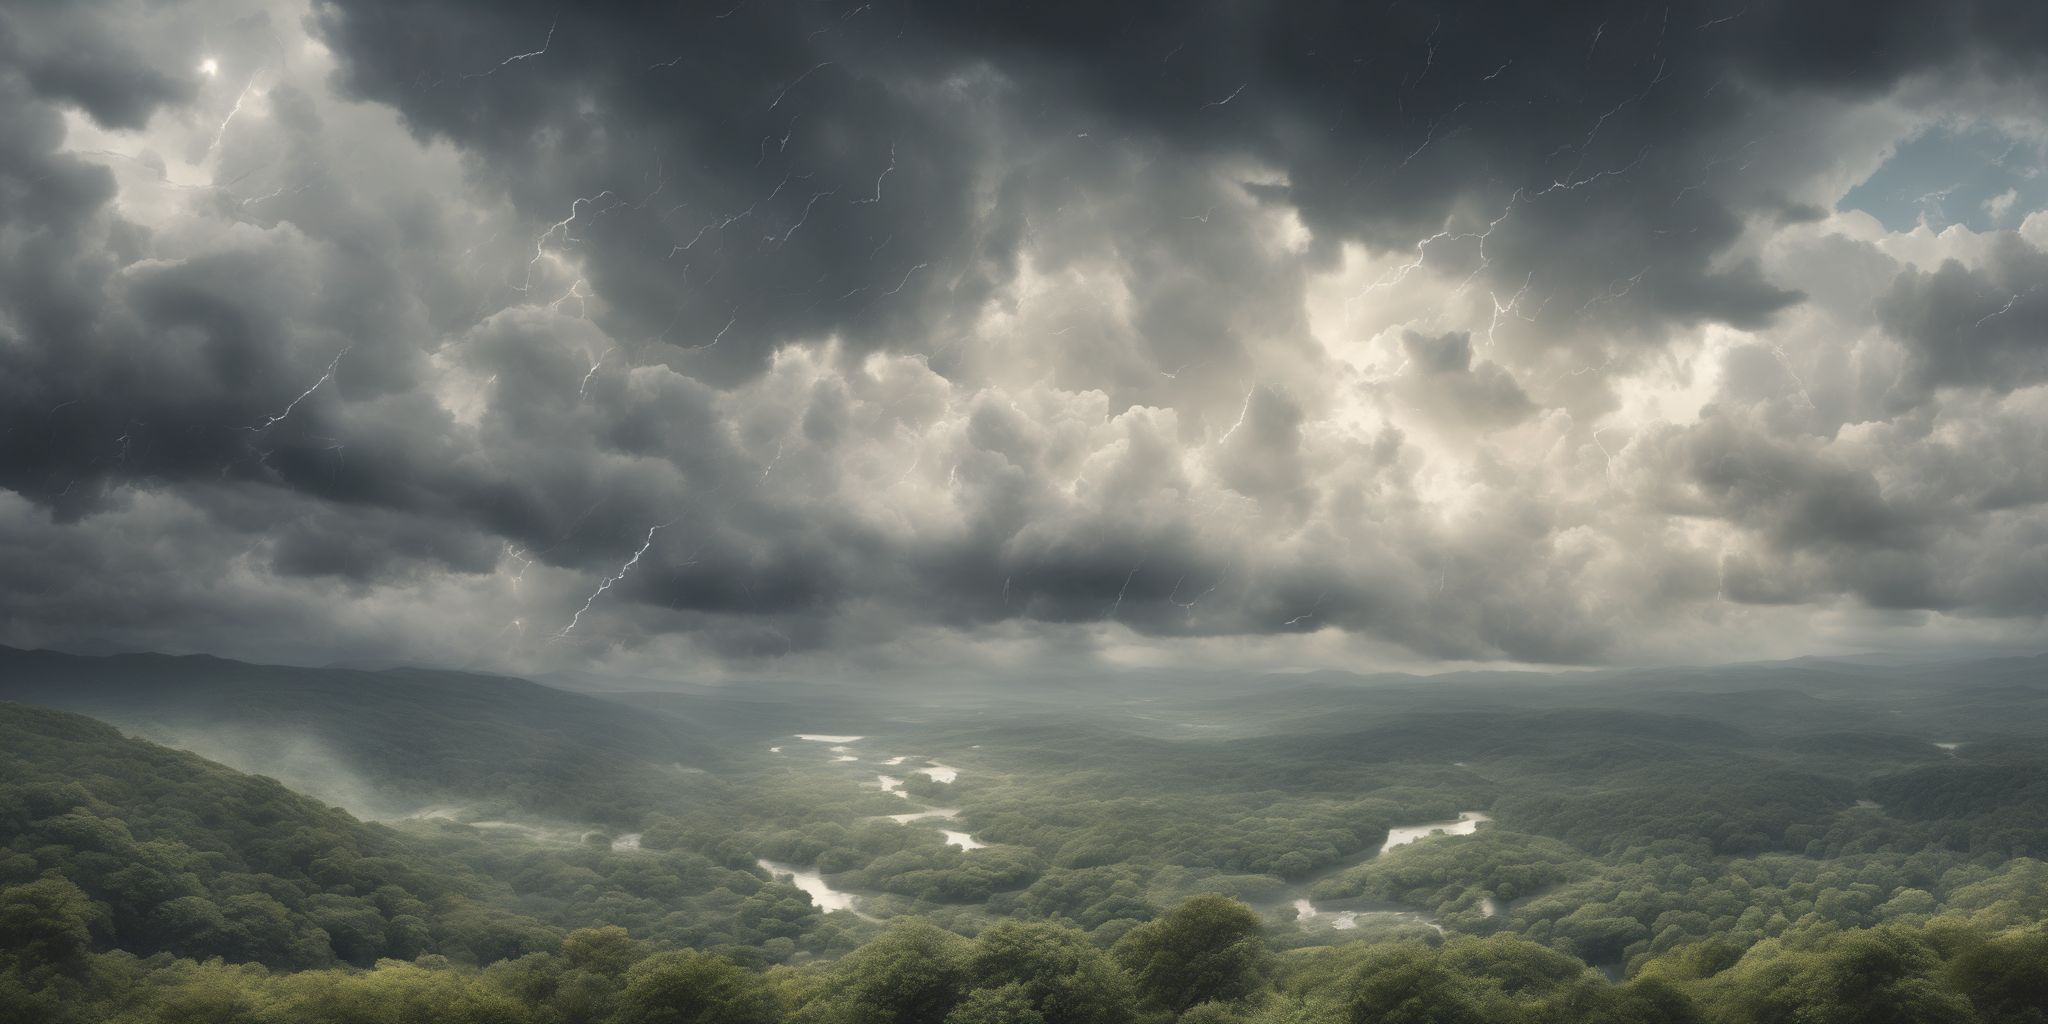 Forecast  in realistic, photographic style